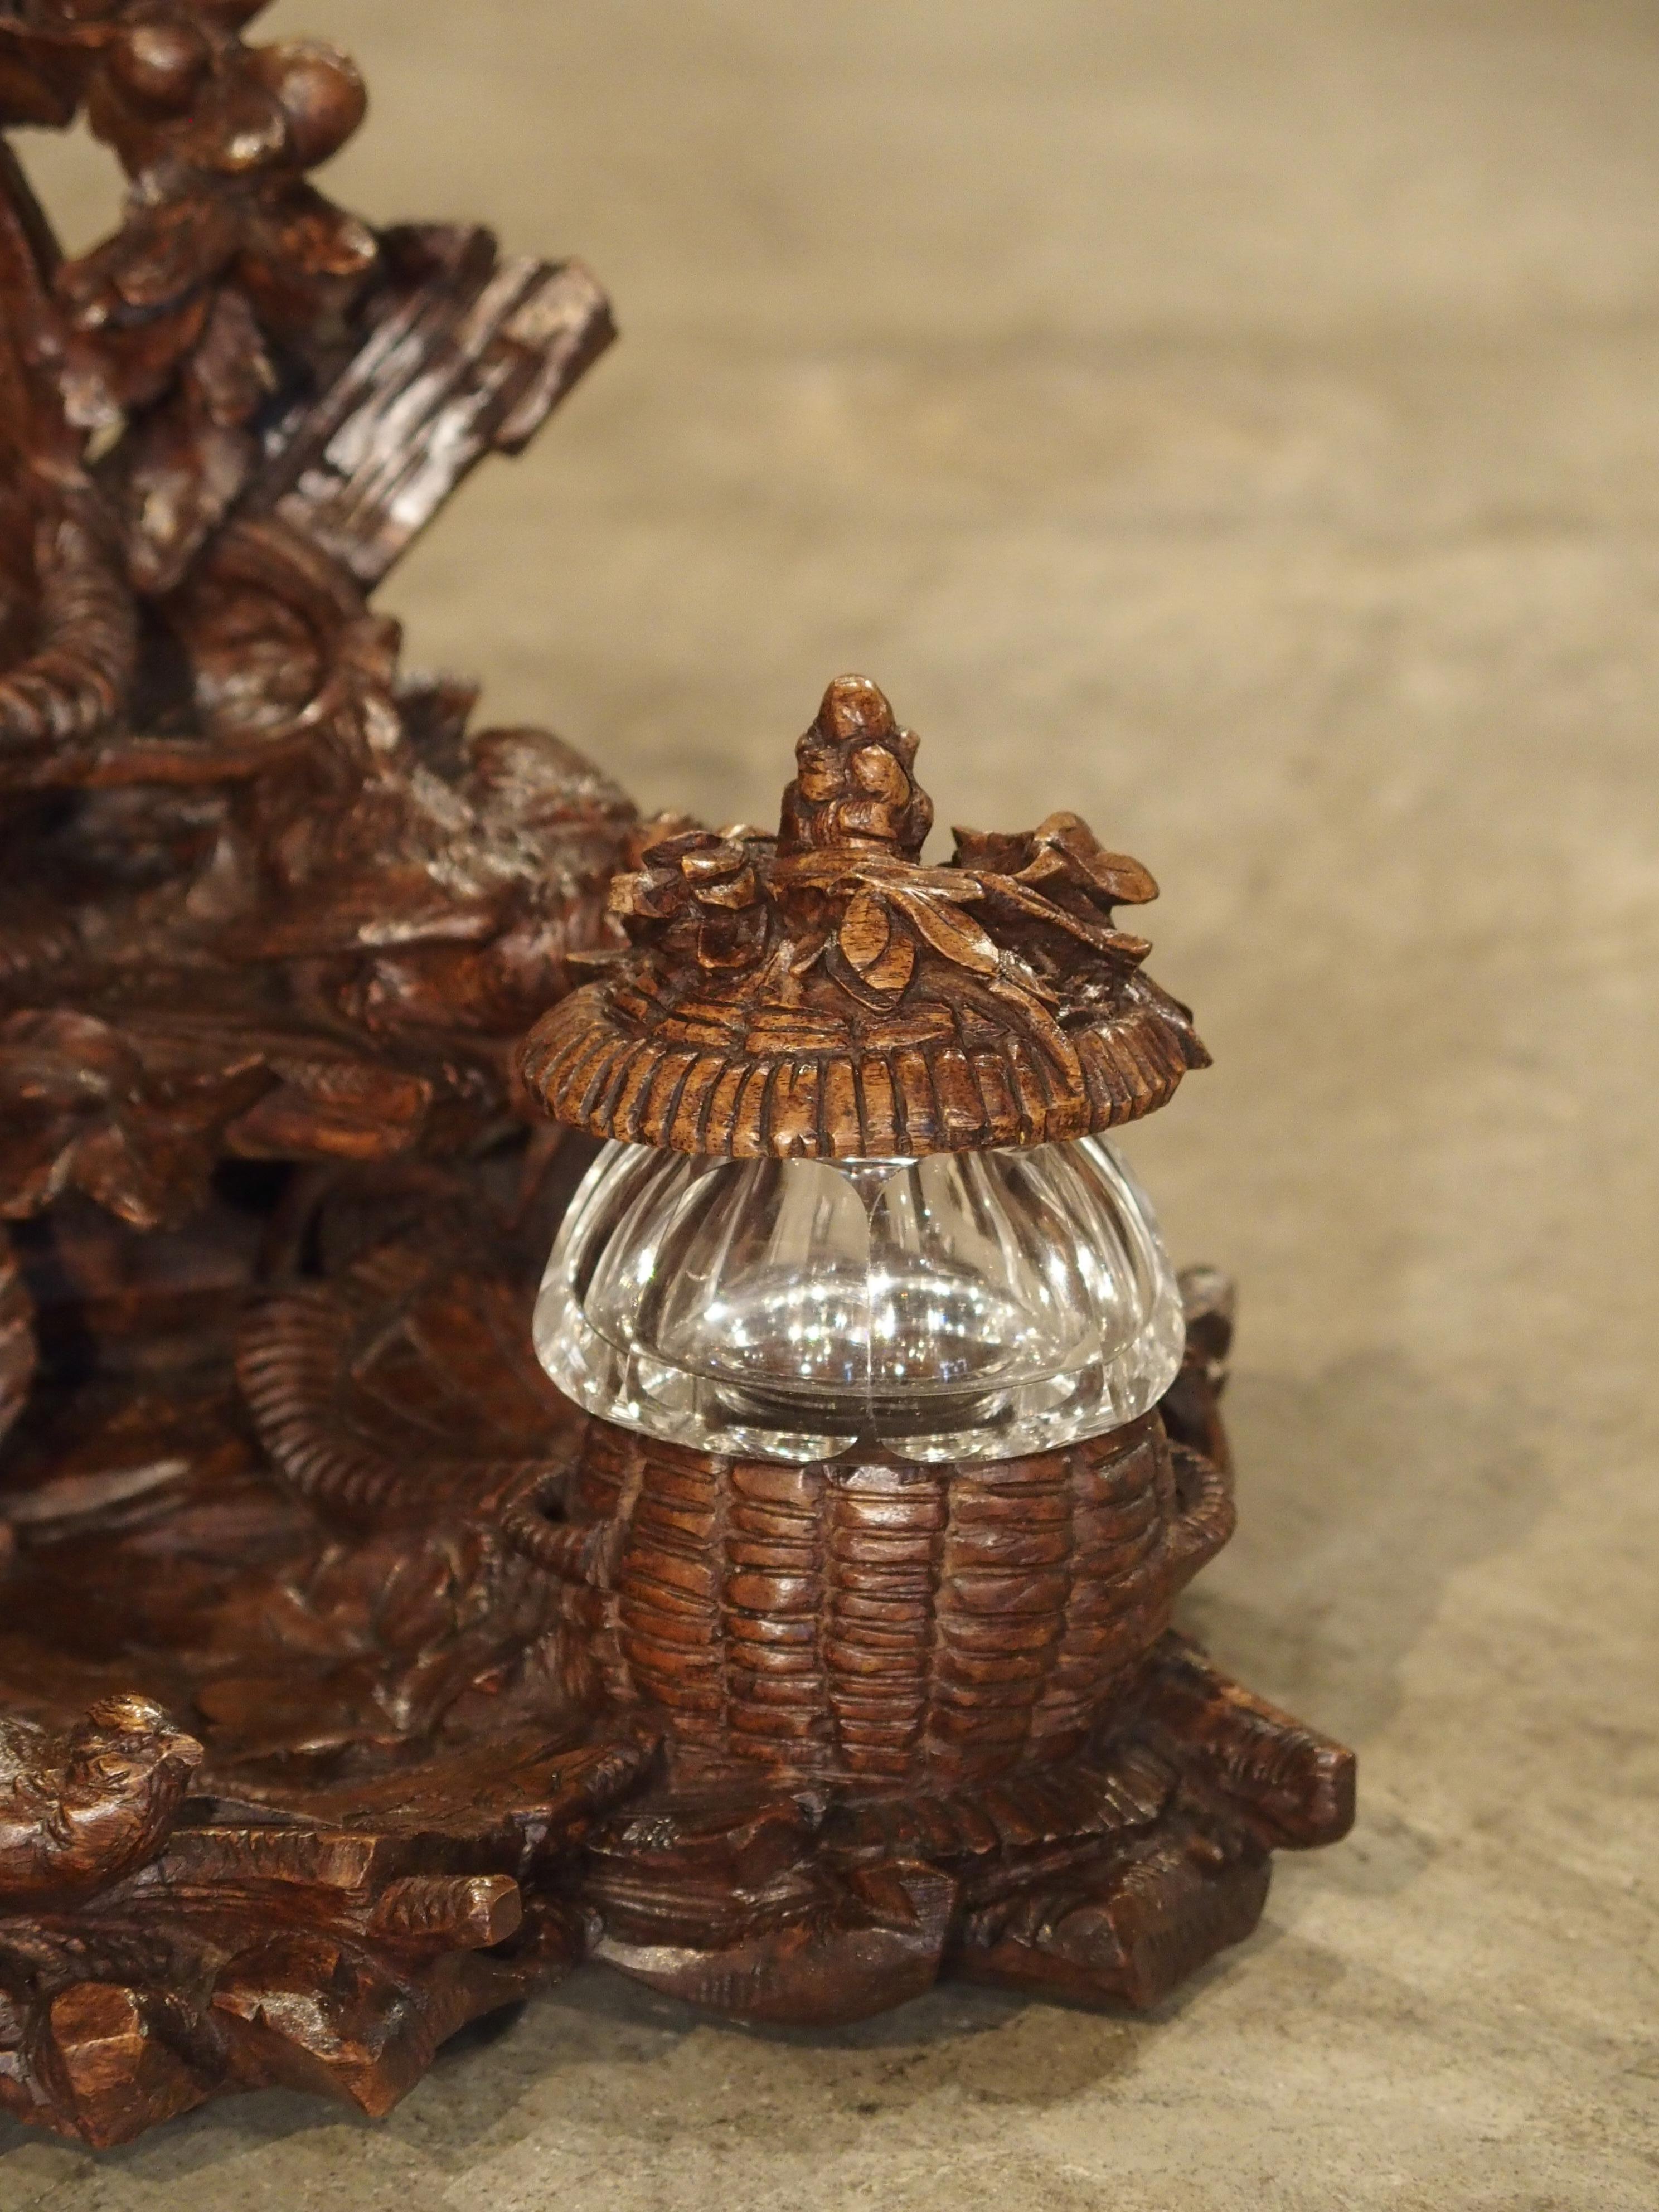 This stunning antique Black Forest inkwell has been made from walnut wood and dates to circa 1900. The piece is composed of carved twigs, leaves, berries, rocks and five little birds. Toward the top of the inkwell, is a small wicker basket with a